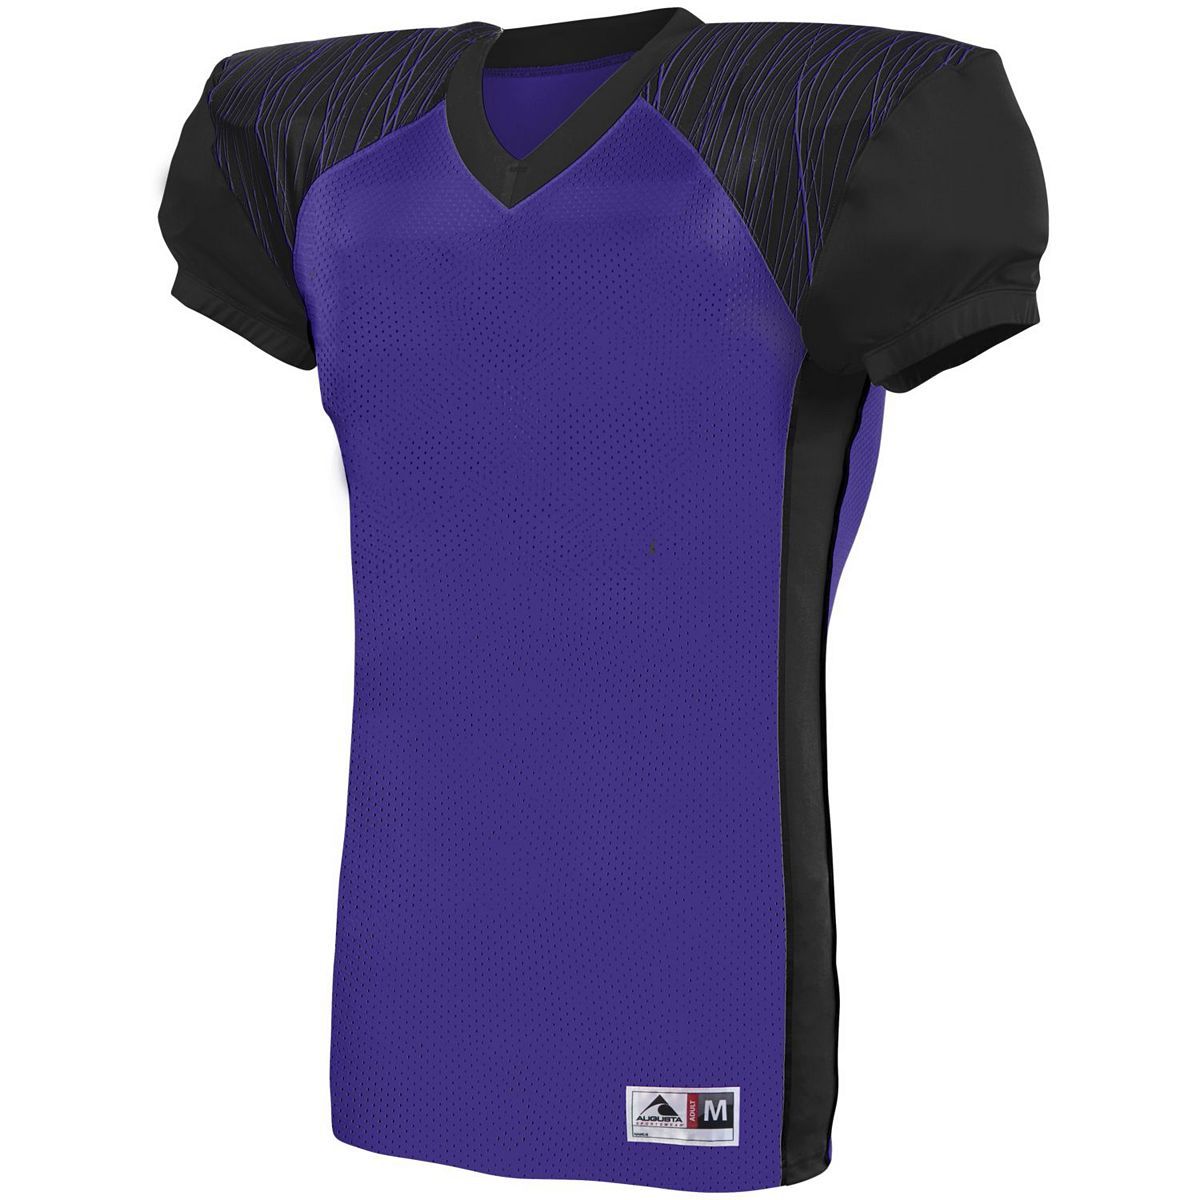 Augusta Sportswear Youth Zone Play Jersey in Purple/Black/Purple Print  -Part of the Youth, Youth-Jersey, Augusta-Products, Football, Shirts, All-Sports, All-Sports-1 product lines at KanaleyCreations.com